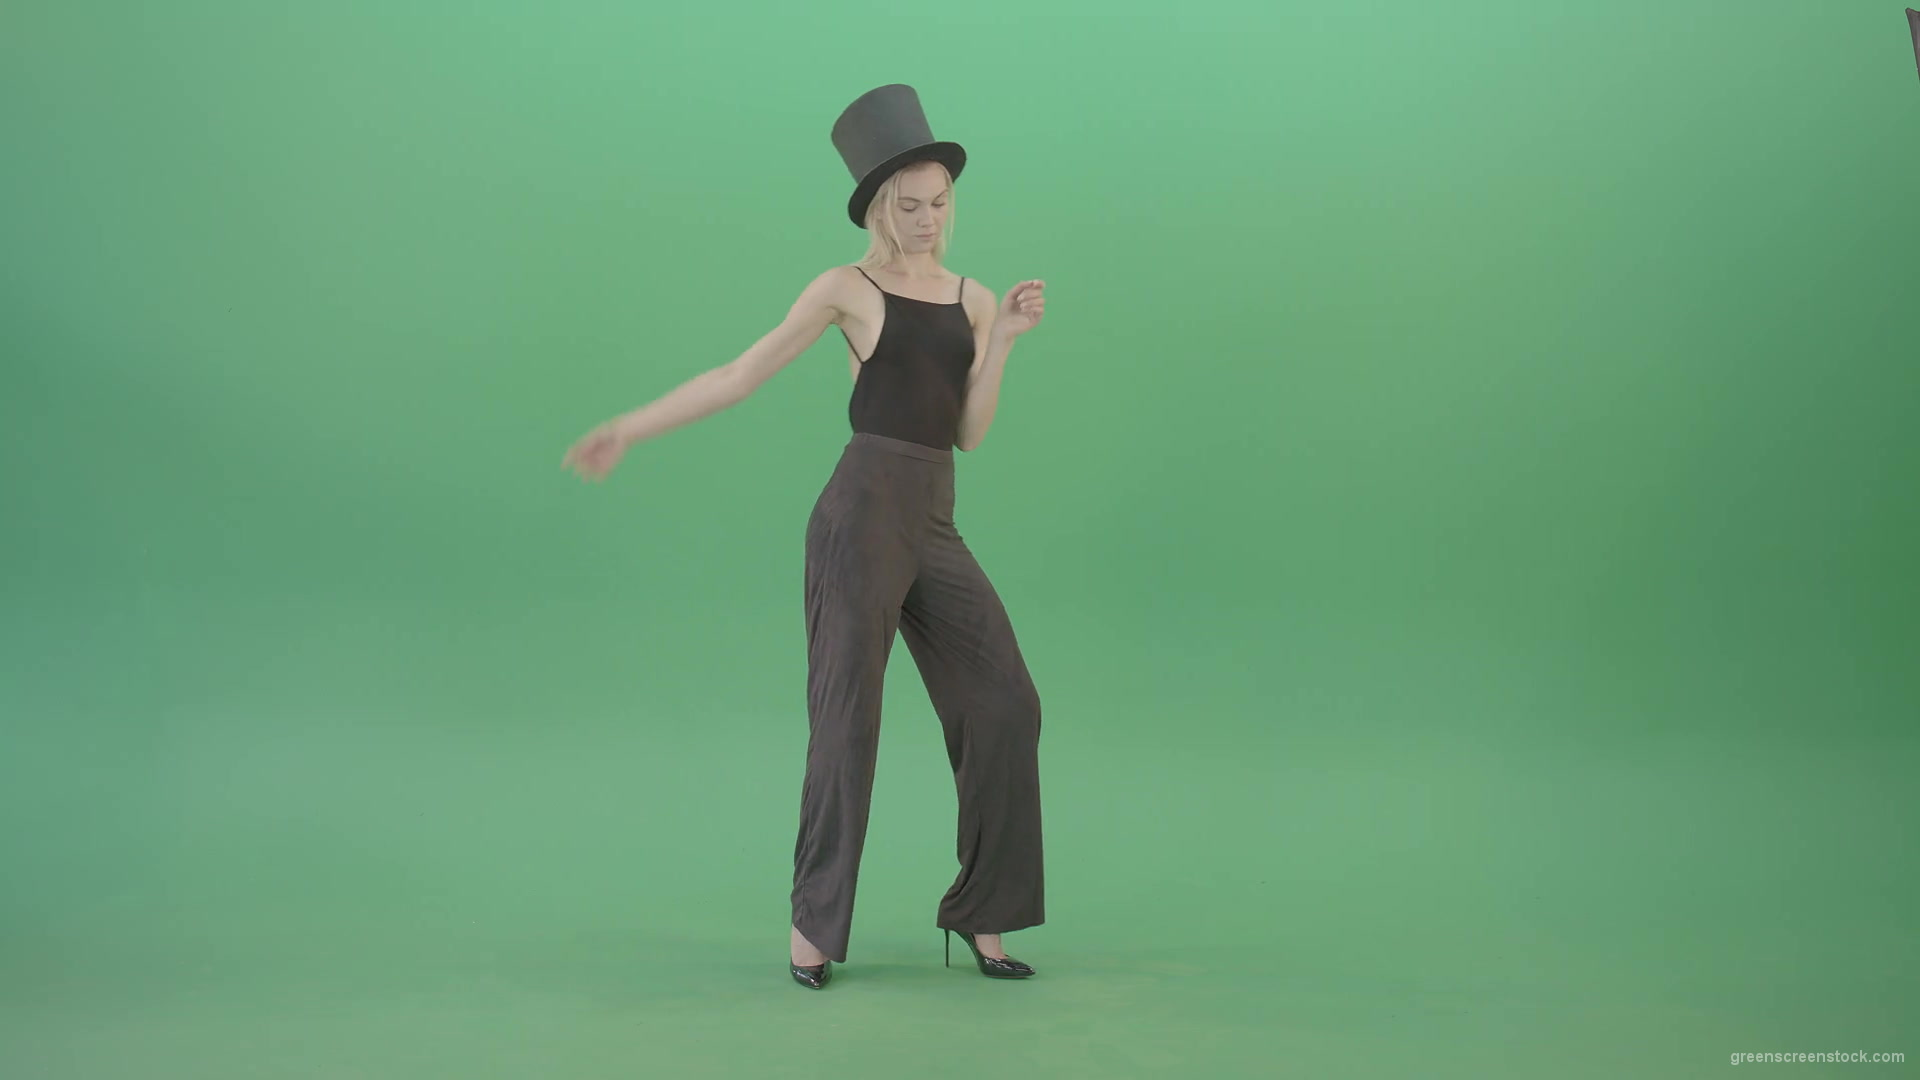 Girl-with-black-busines-cylinder-hat-dancing-isolated-on-green-background-4K-Video-Footage-1920_004 Green Screen Stock